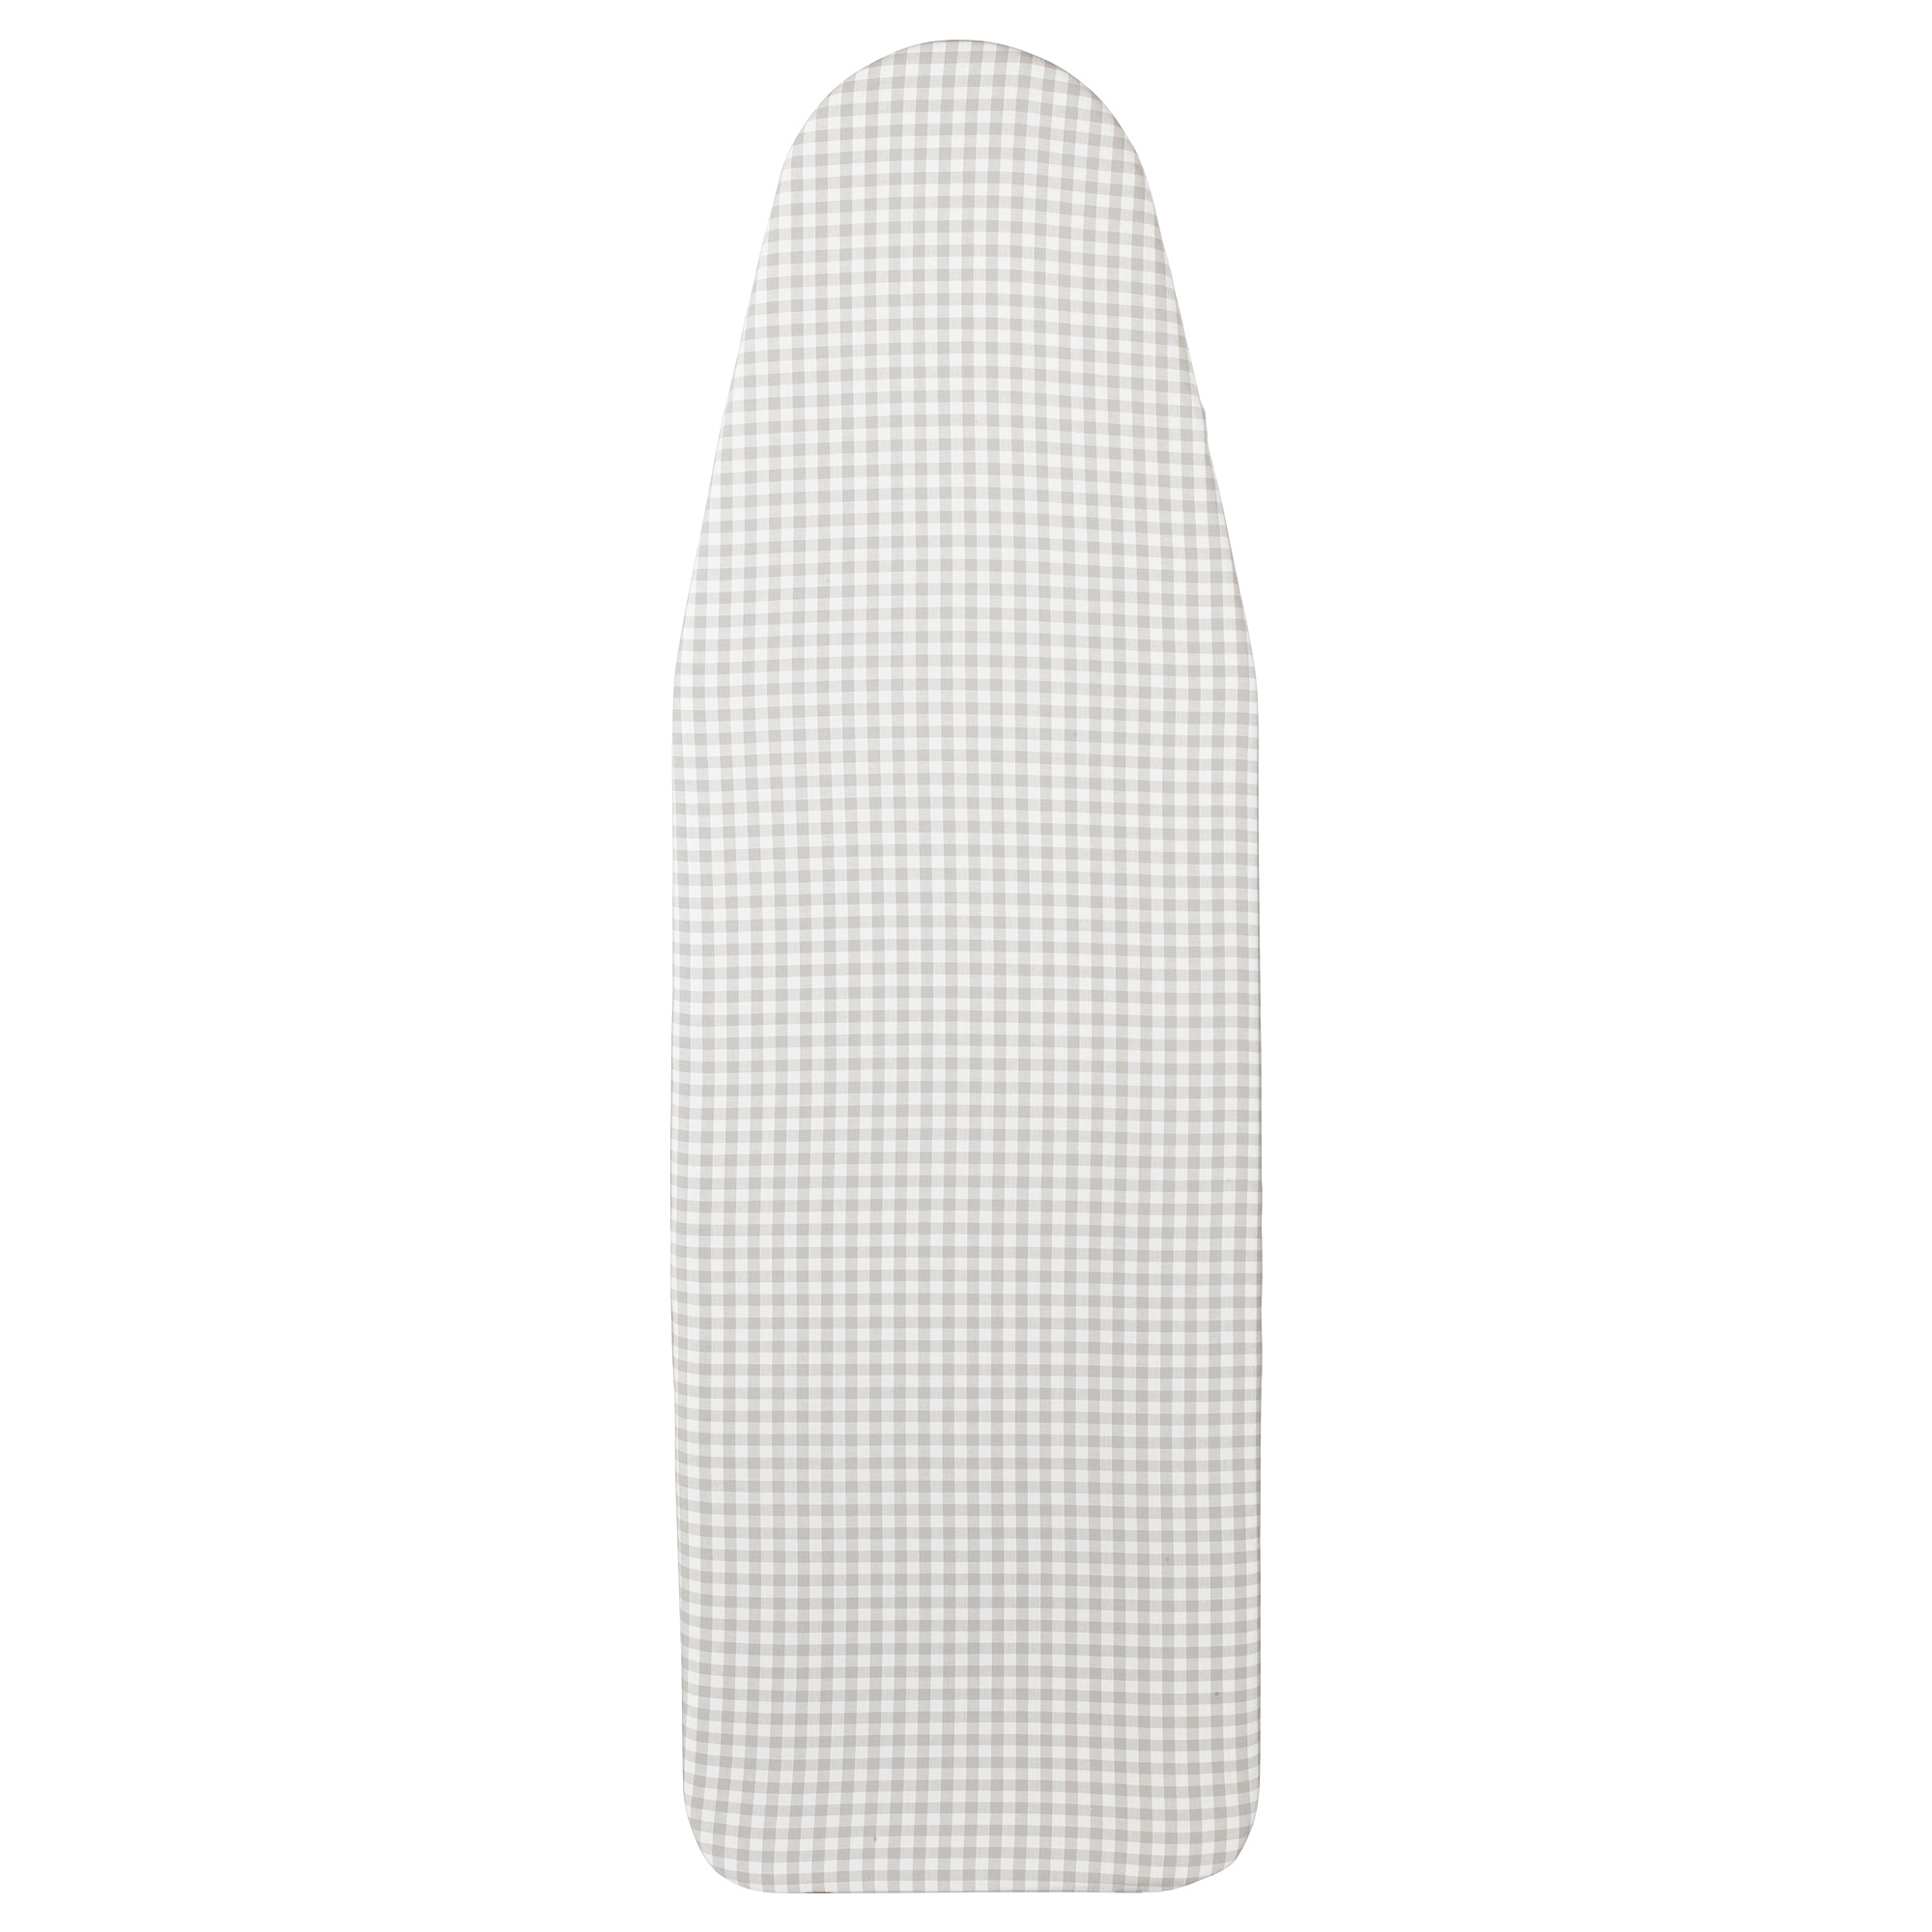 LAGT ironing board cover